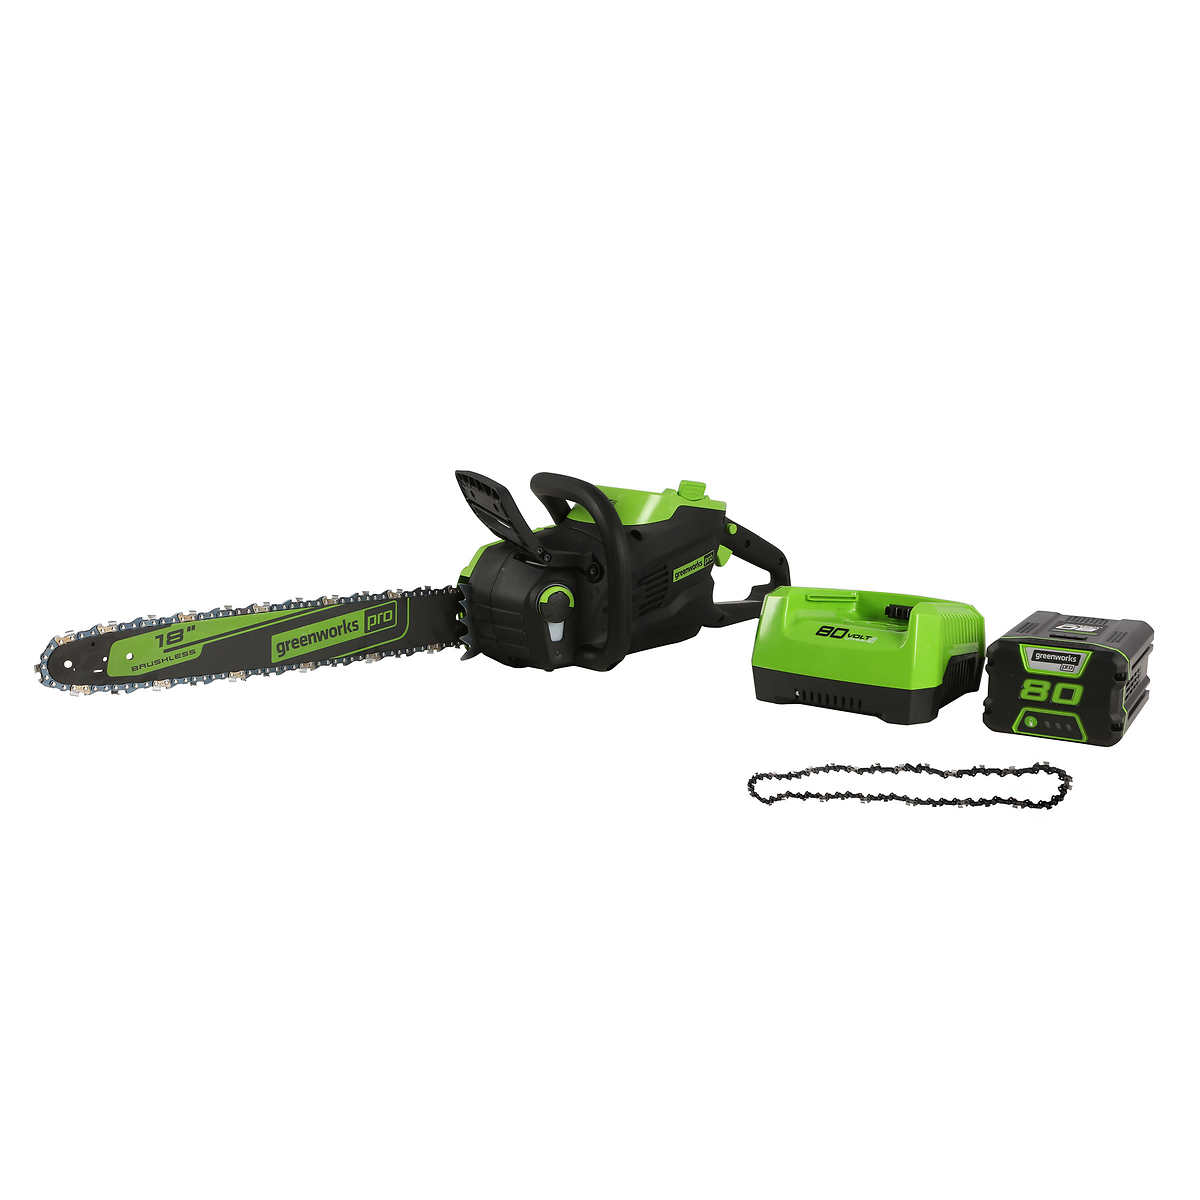 Greenworks Pro 80v 18” 2.0 kw Brushless Chainsaw | Costco